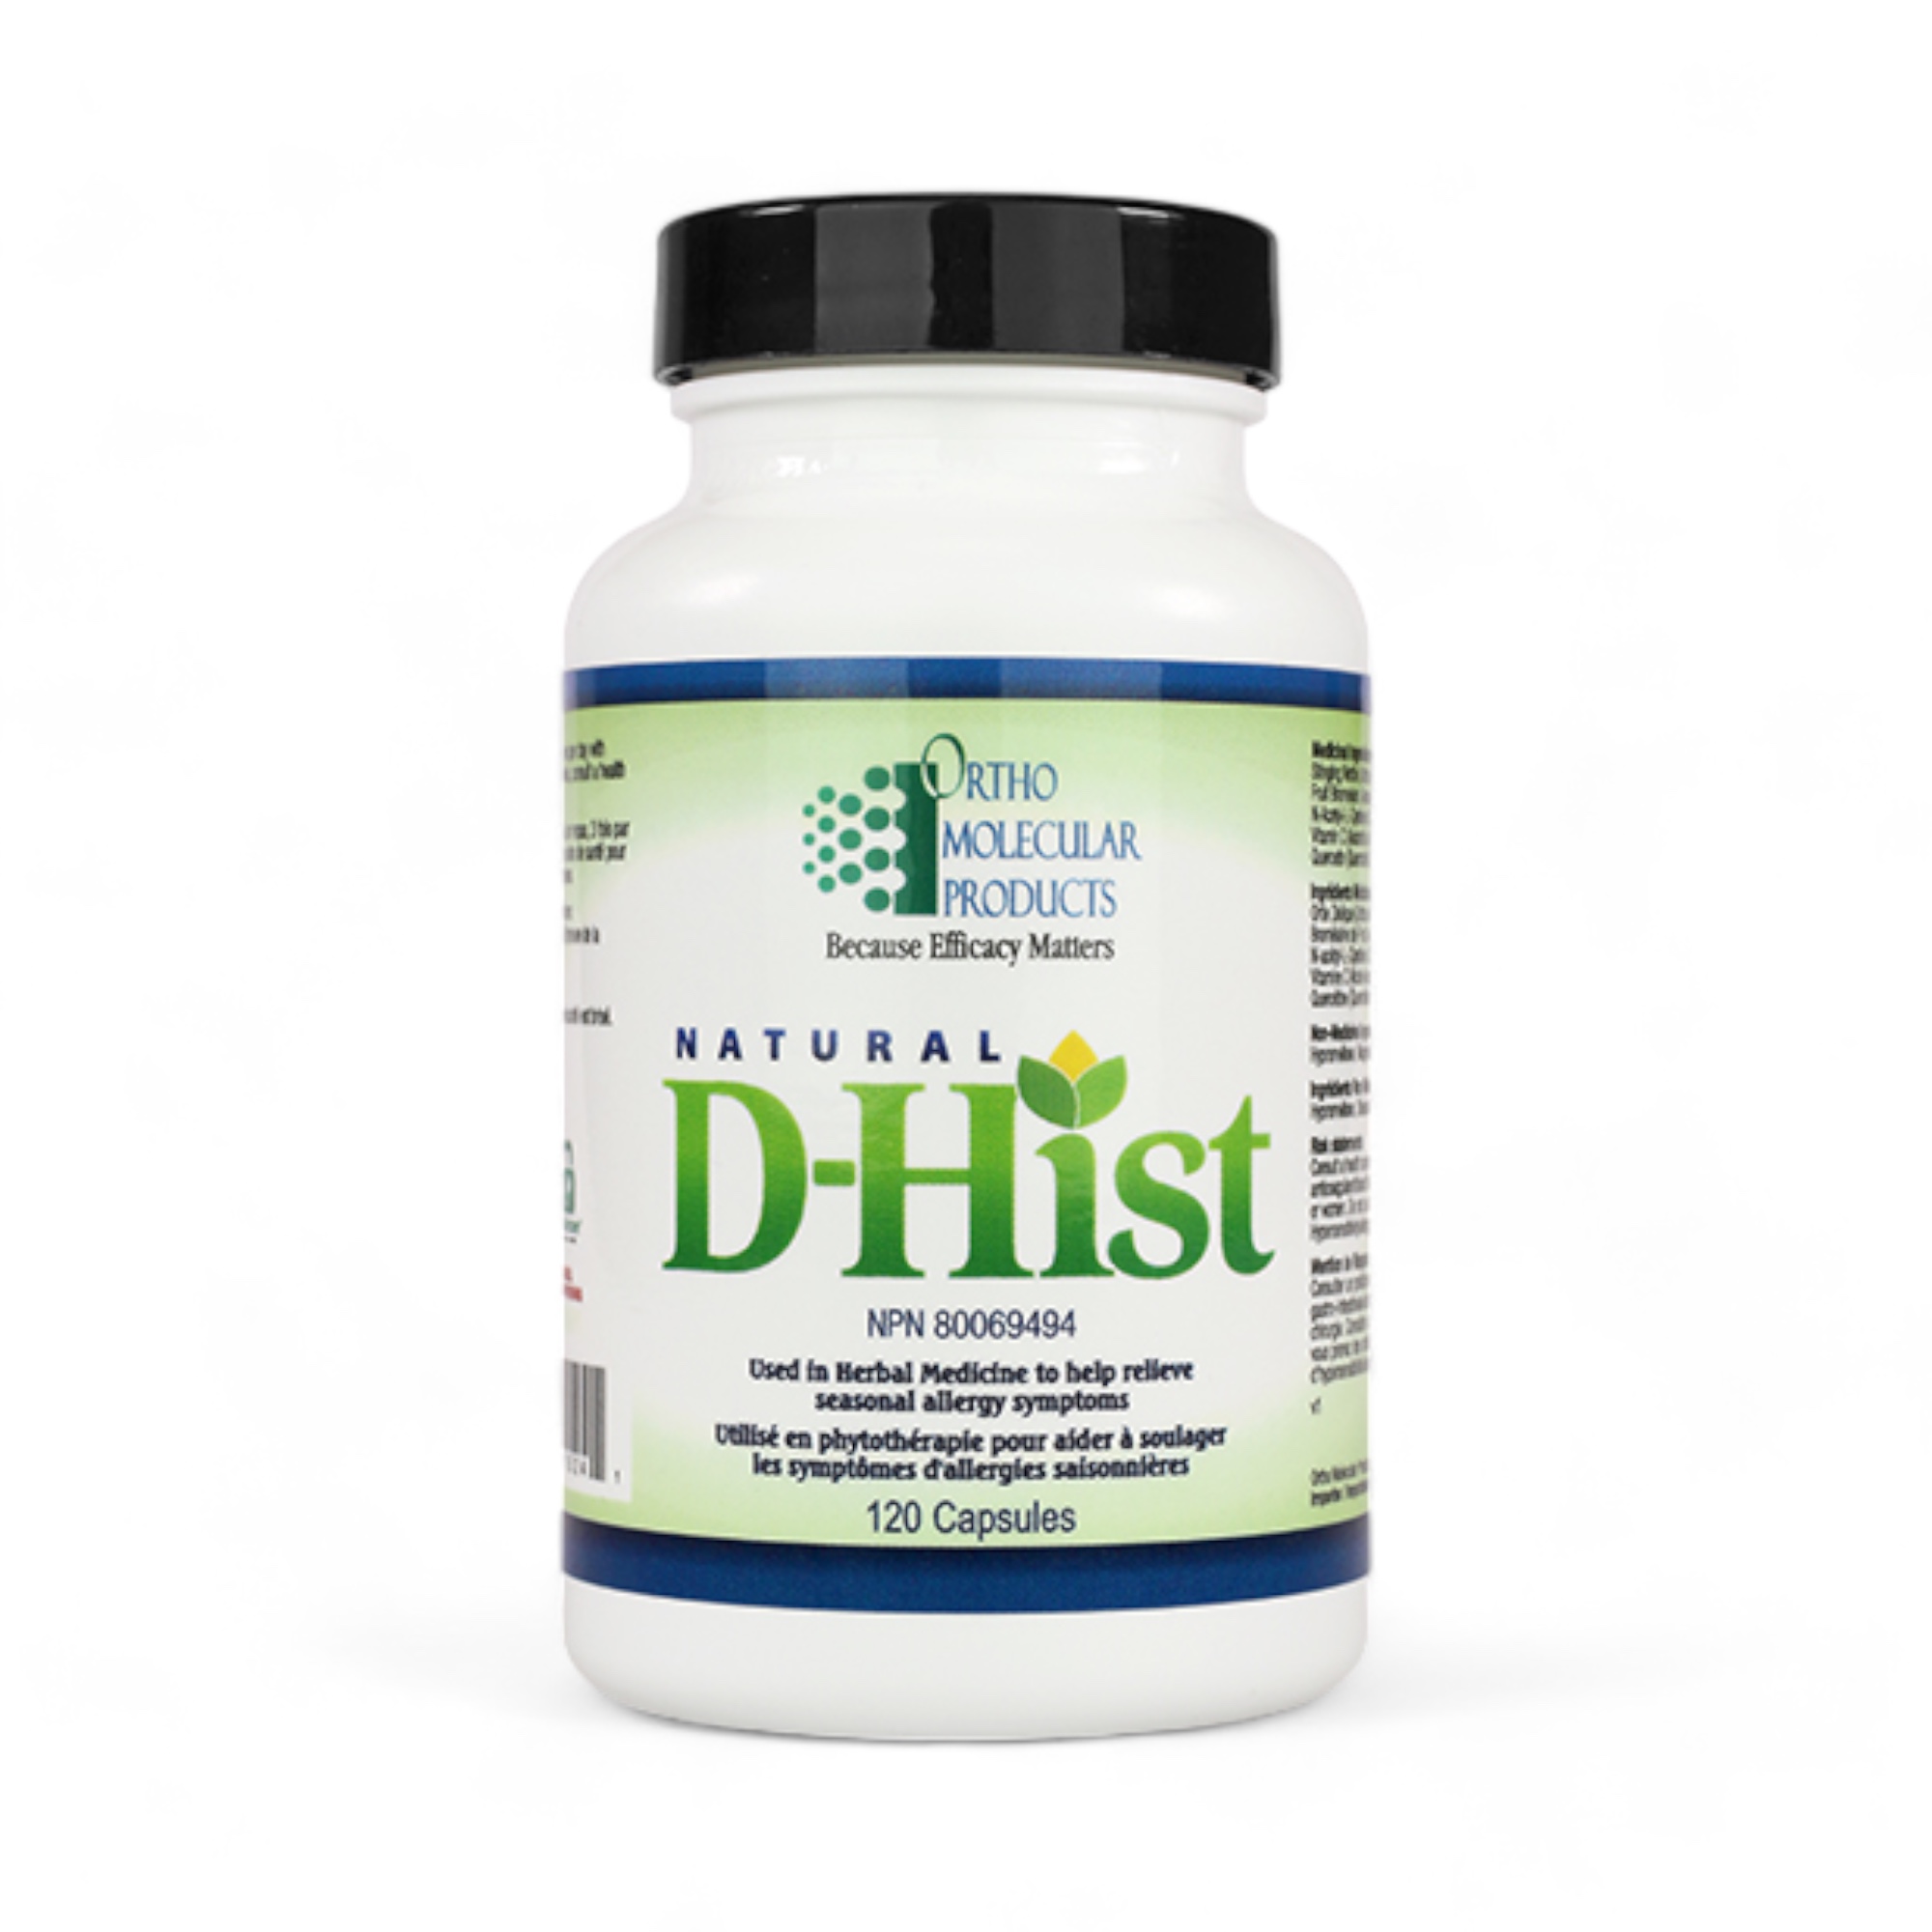 D-Hist Naturel 120 capsules Ortho Molecular Products